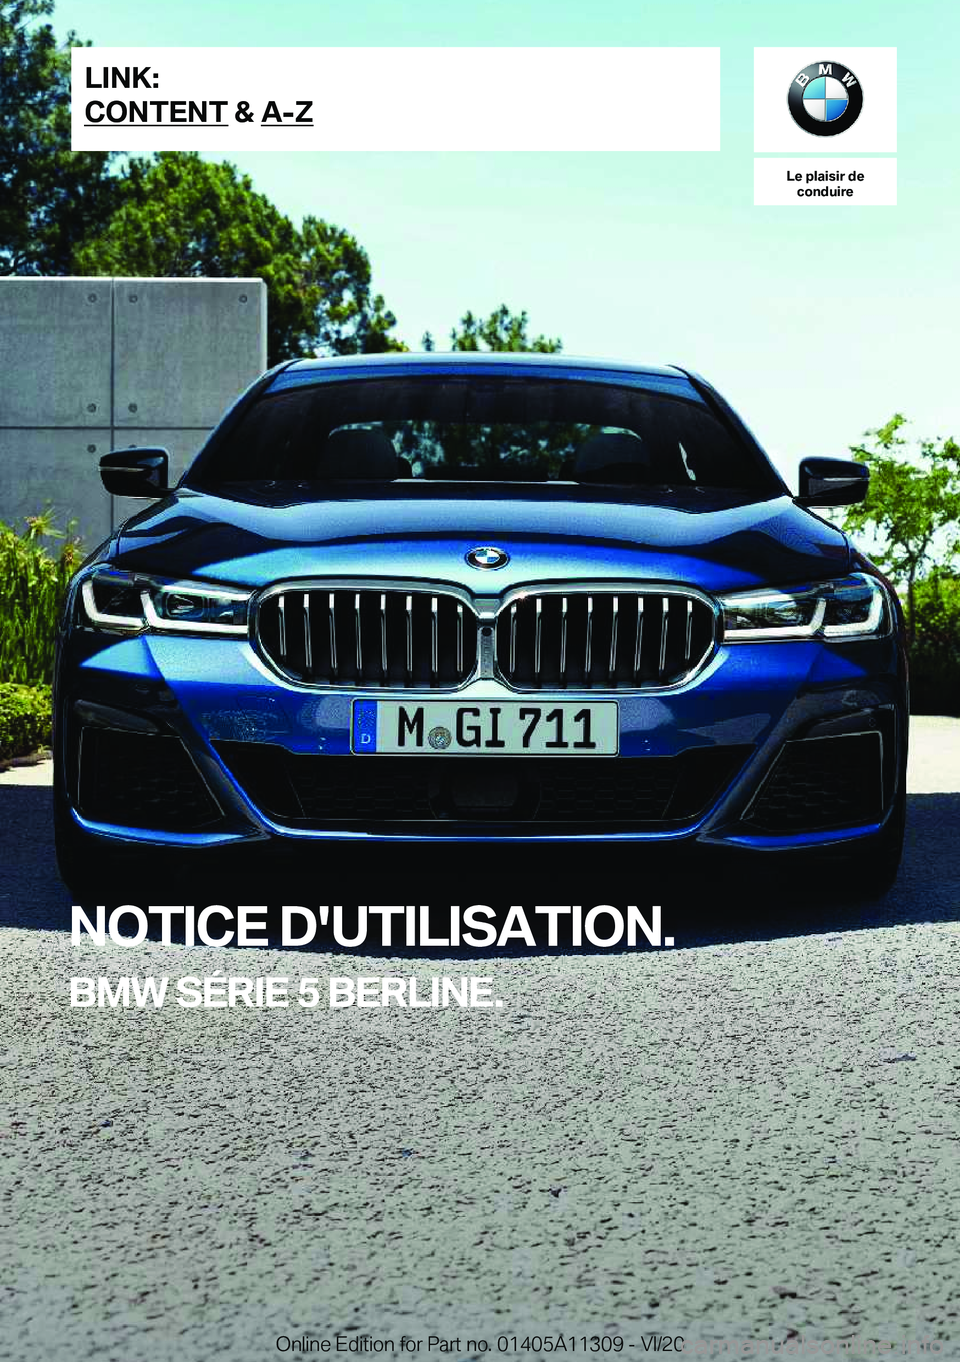 BMW 5 SERIES 2021  Notices Demploi (in French) �L�e��p�l�a�i�s�i�r��d�e�c�o�n�d�u�i�r�e
�N�O�T�I�C�E��D�'�U�T�I�L�I�S�A�T�I�O�N�.
�B�M�W��S�É�R�I�E��5��B�E�R�L�I�N�E�.�L�I�N�K�:
�C�O�N�T�E�N�T��&��A�-�Z�O�n�l�i�n�e��E�d�i�t�i�o�n��f